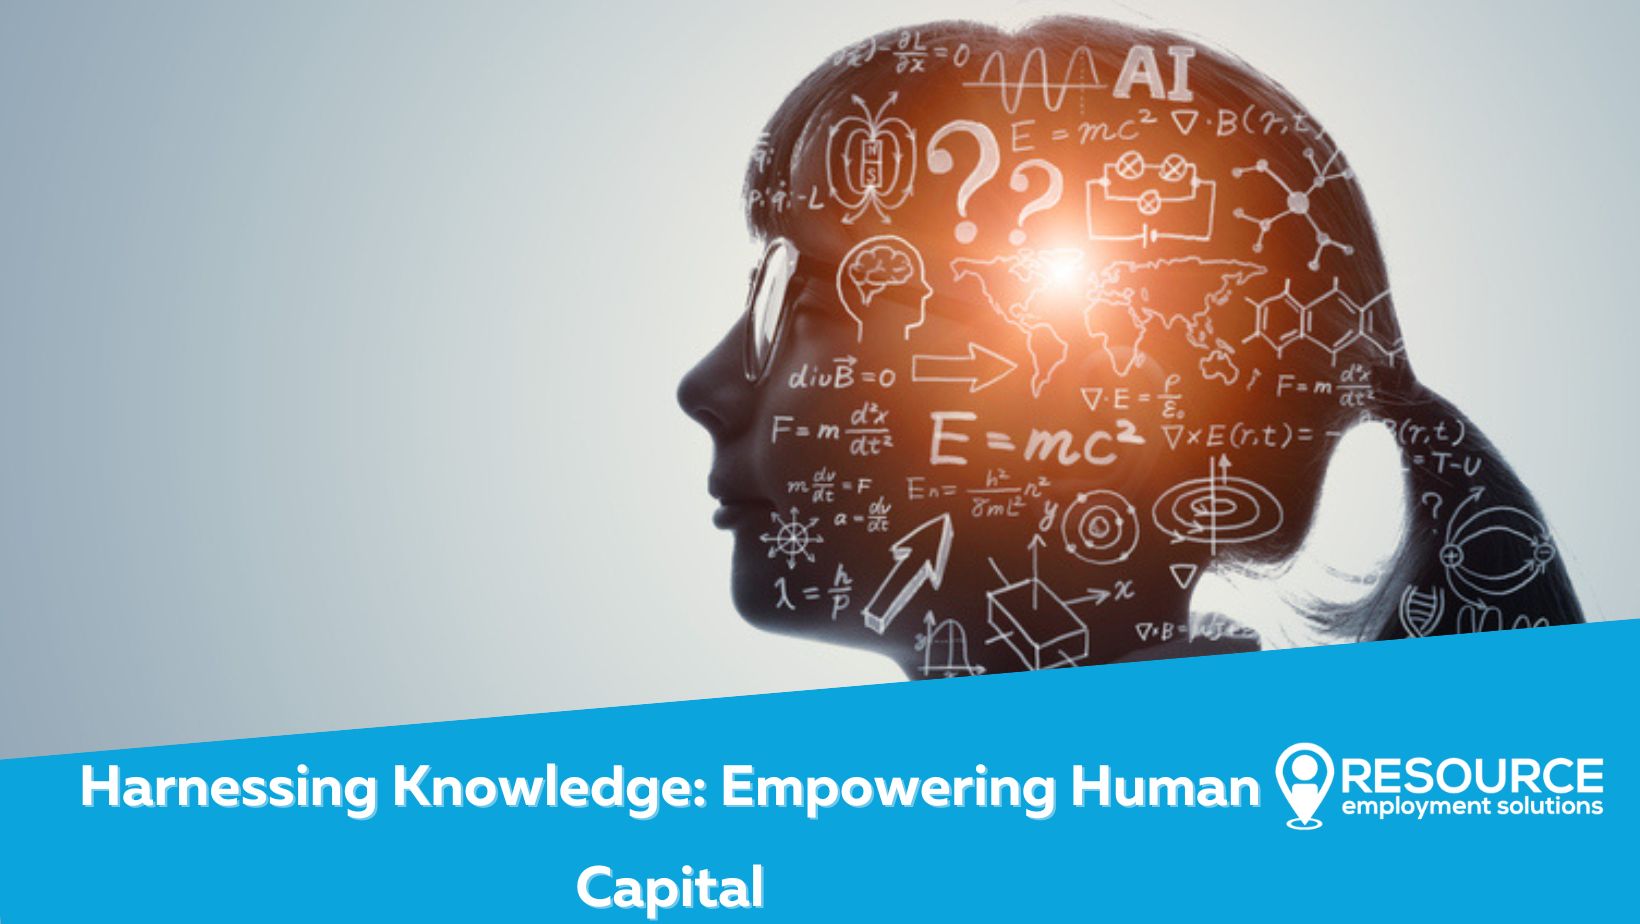 Harnessing Knowledge: Empowering Human Capital